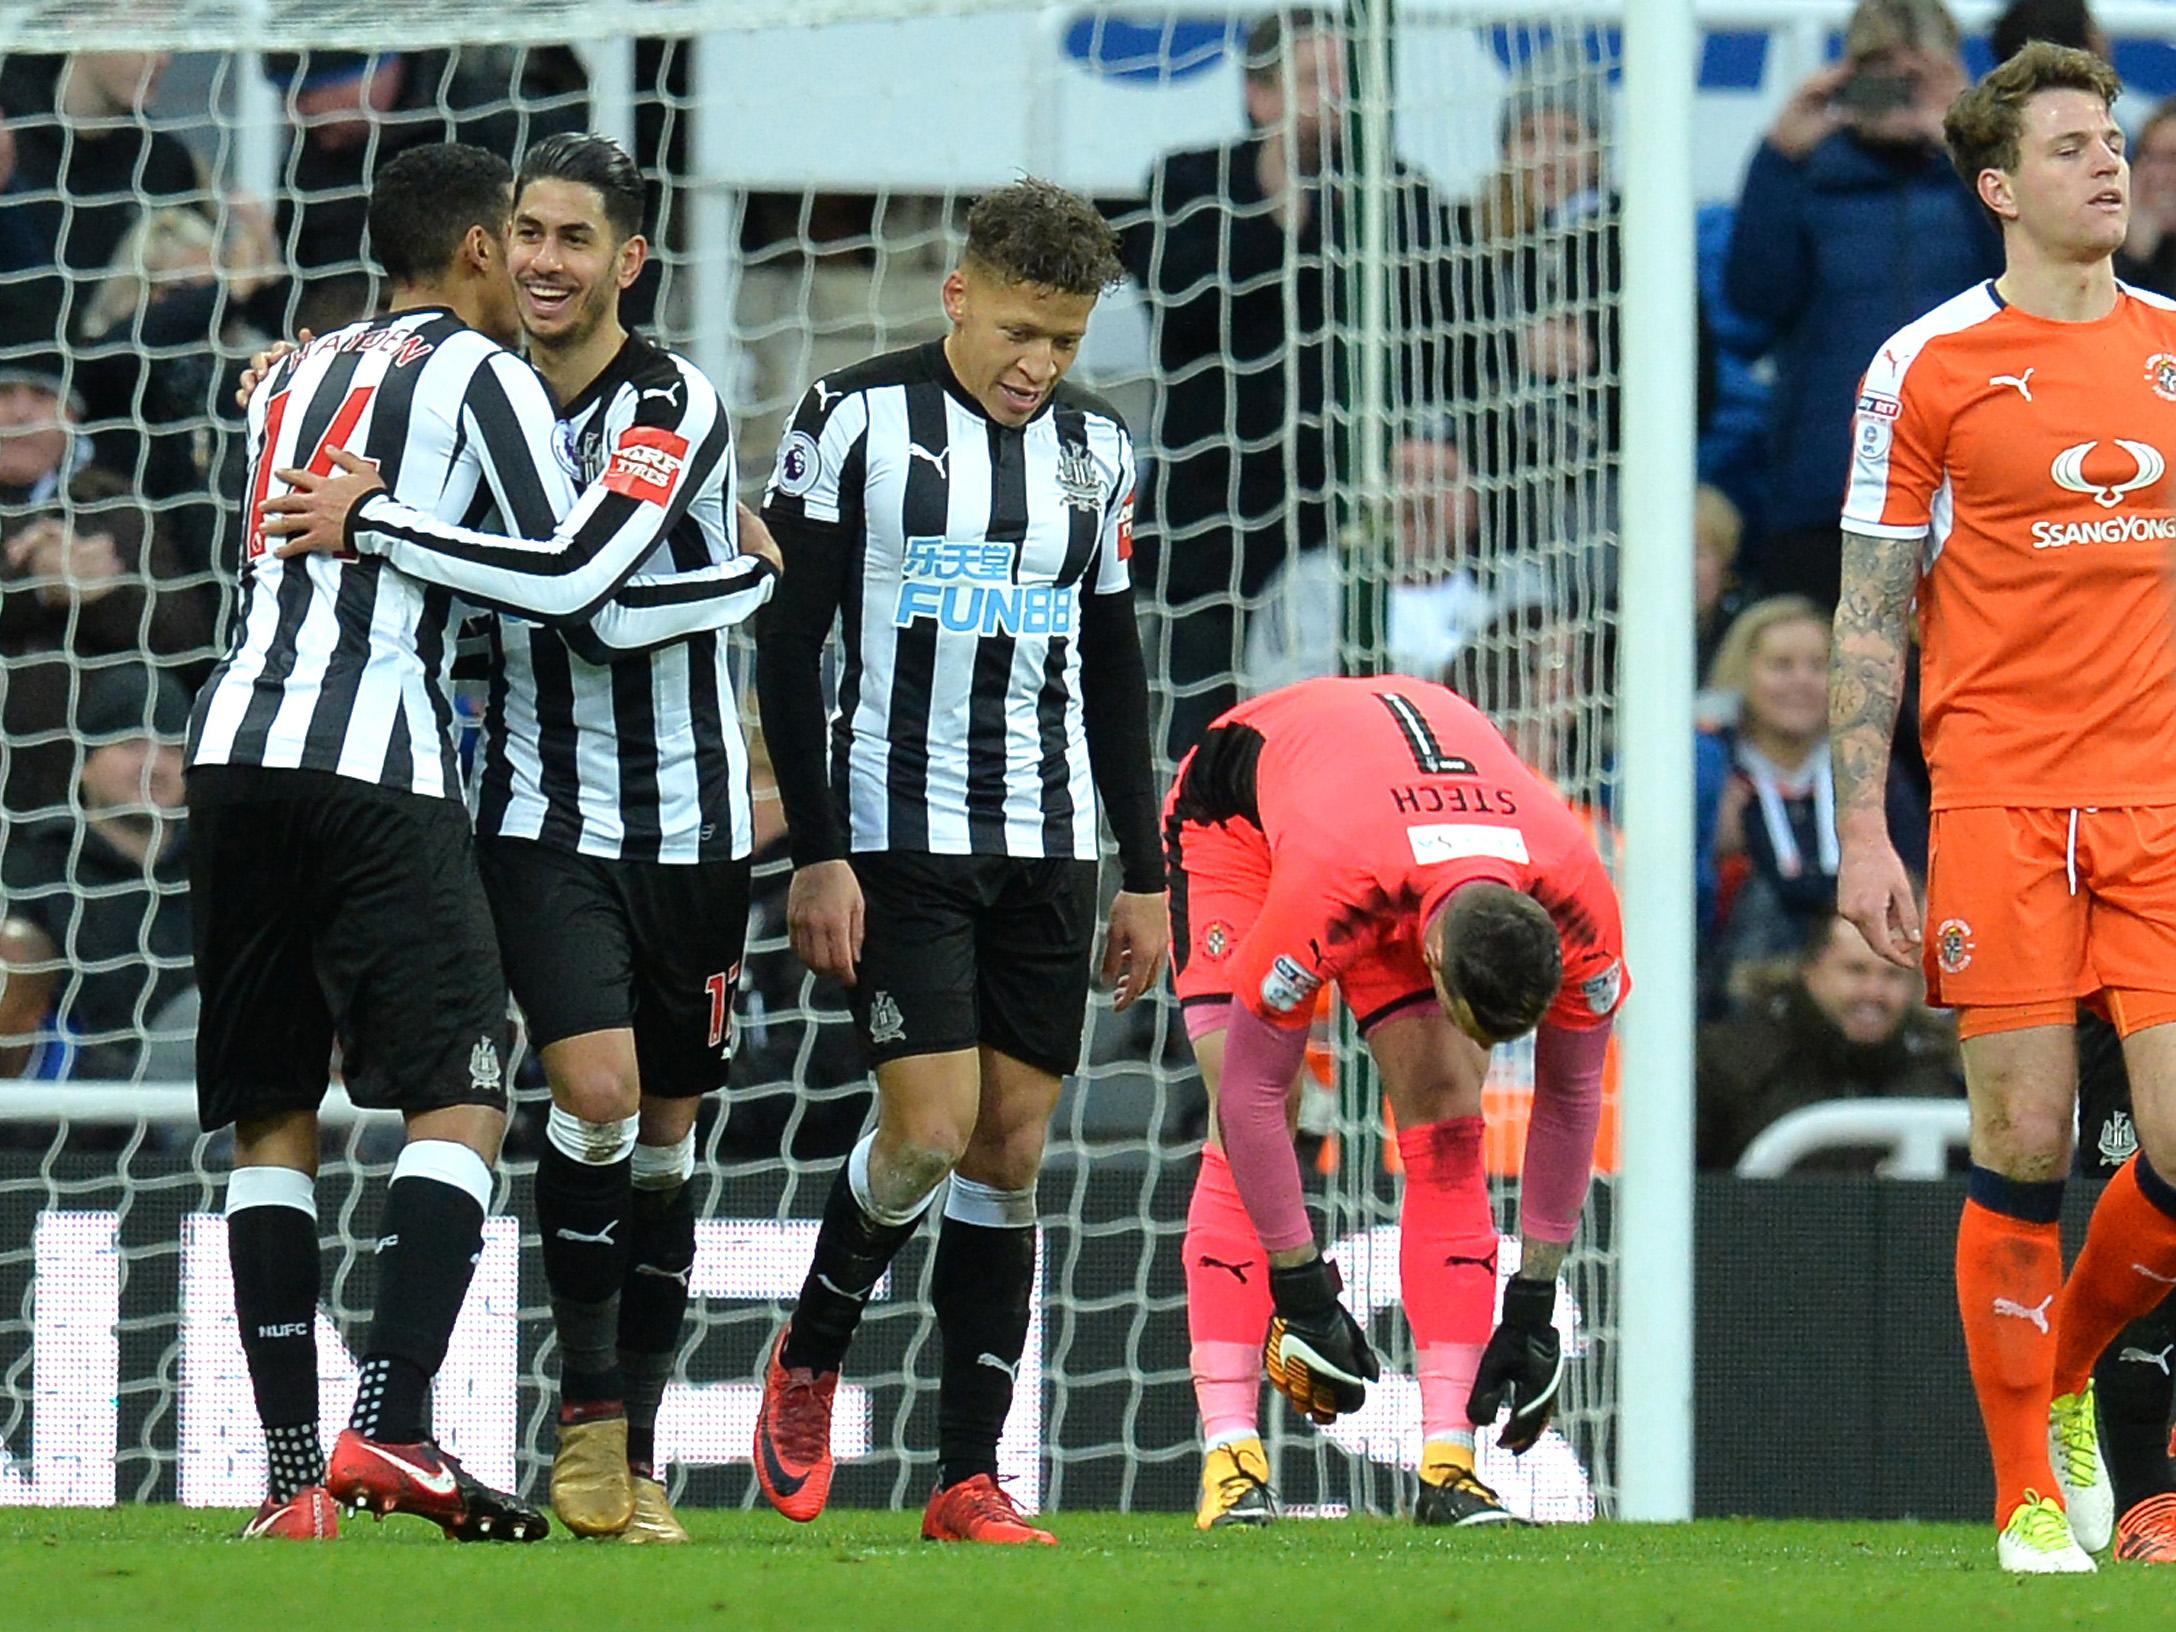 Newcastle came through the test comfortably